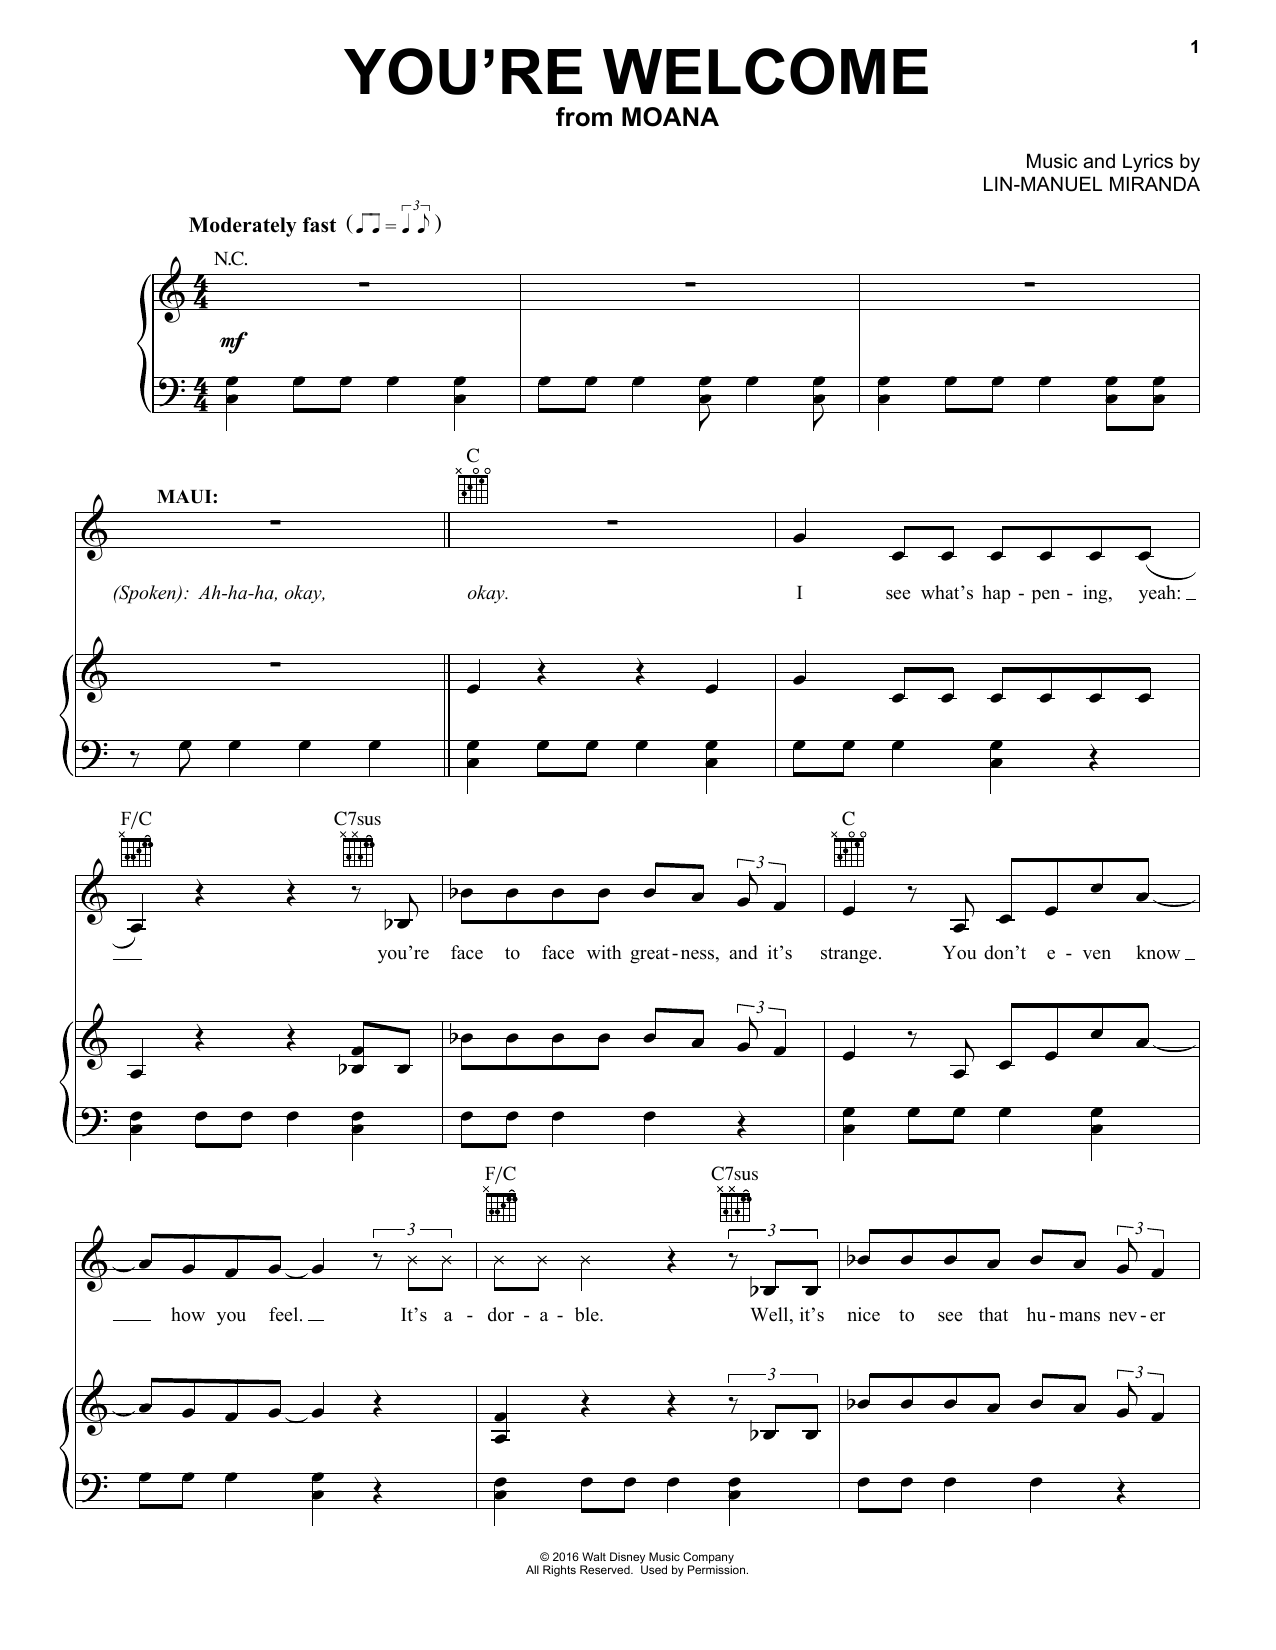 Lin-Manuel Miranda You're Welcome (from Moana) sheet music notes and chords. Download Printable PDF.